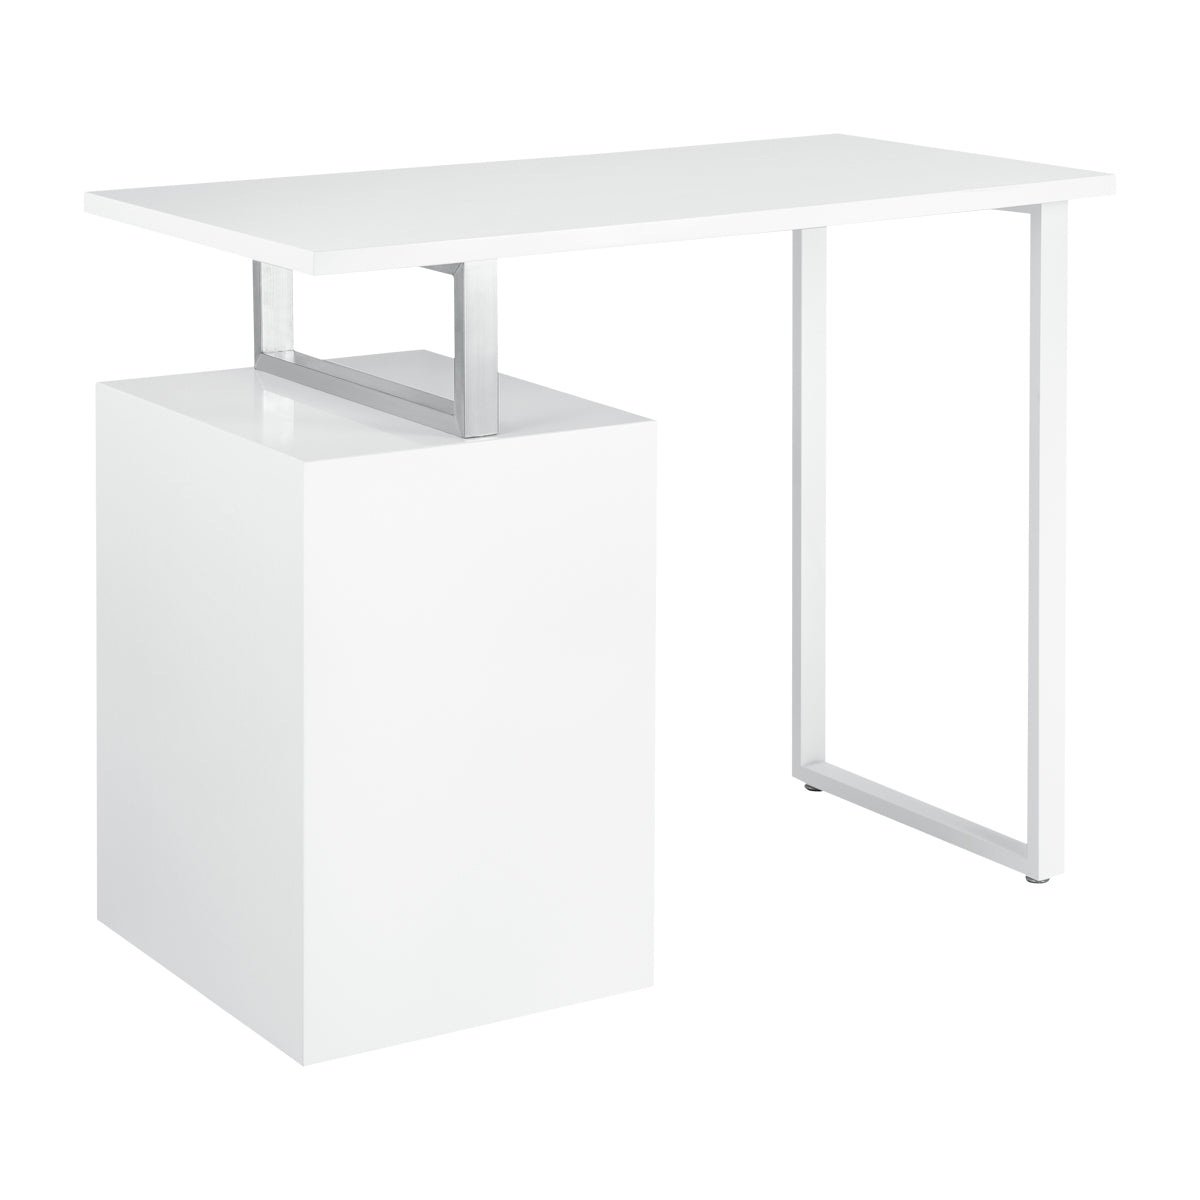 ACTIVESHOP COSMETIC DESK YR-005 WHITE